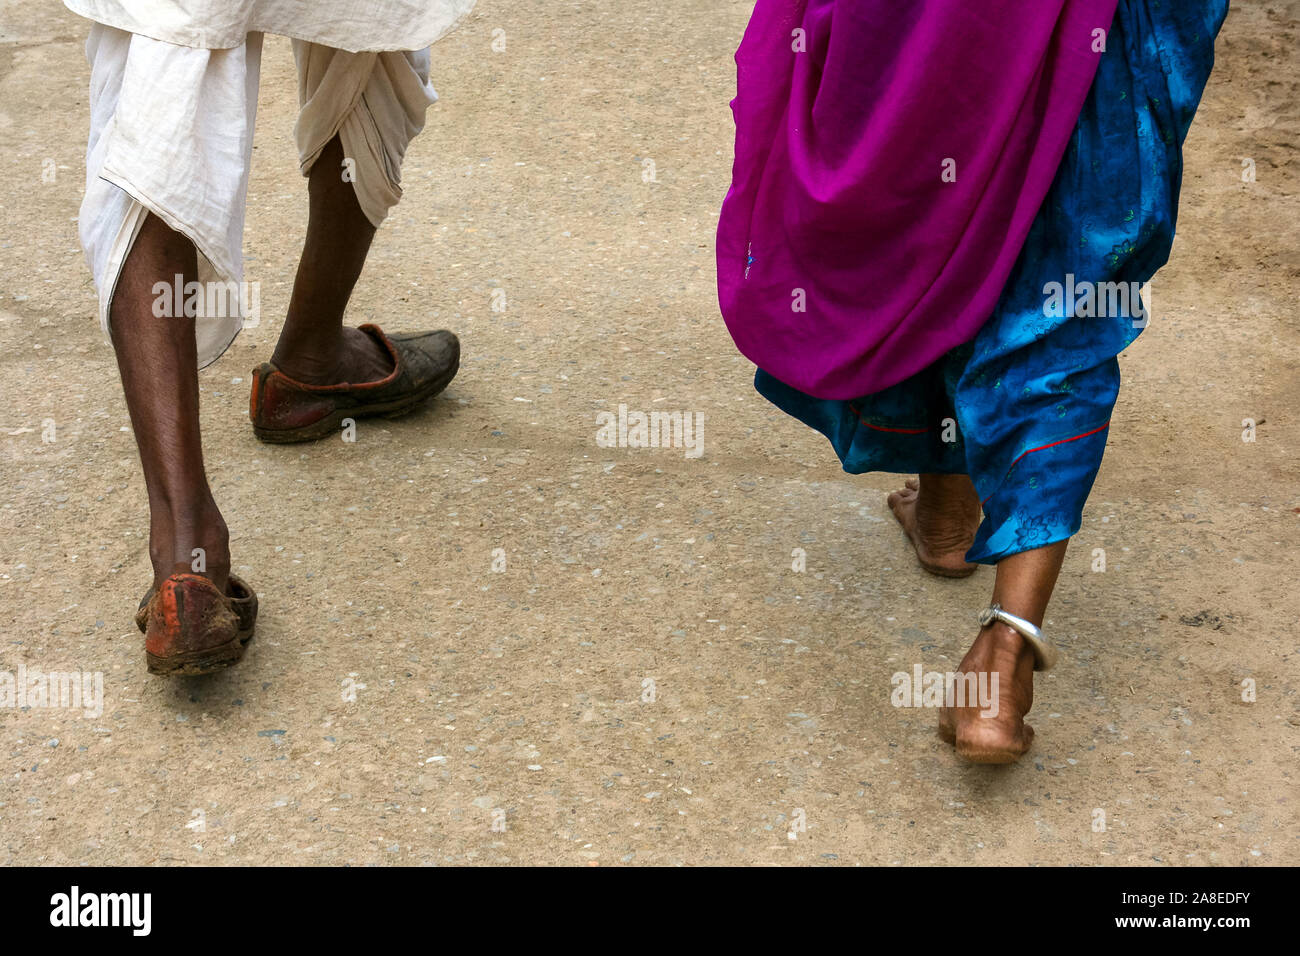 Pushkar, Rajasthan, India: The legs of a walking Indian couple . Stock Photo